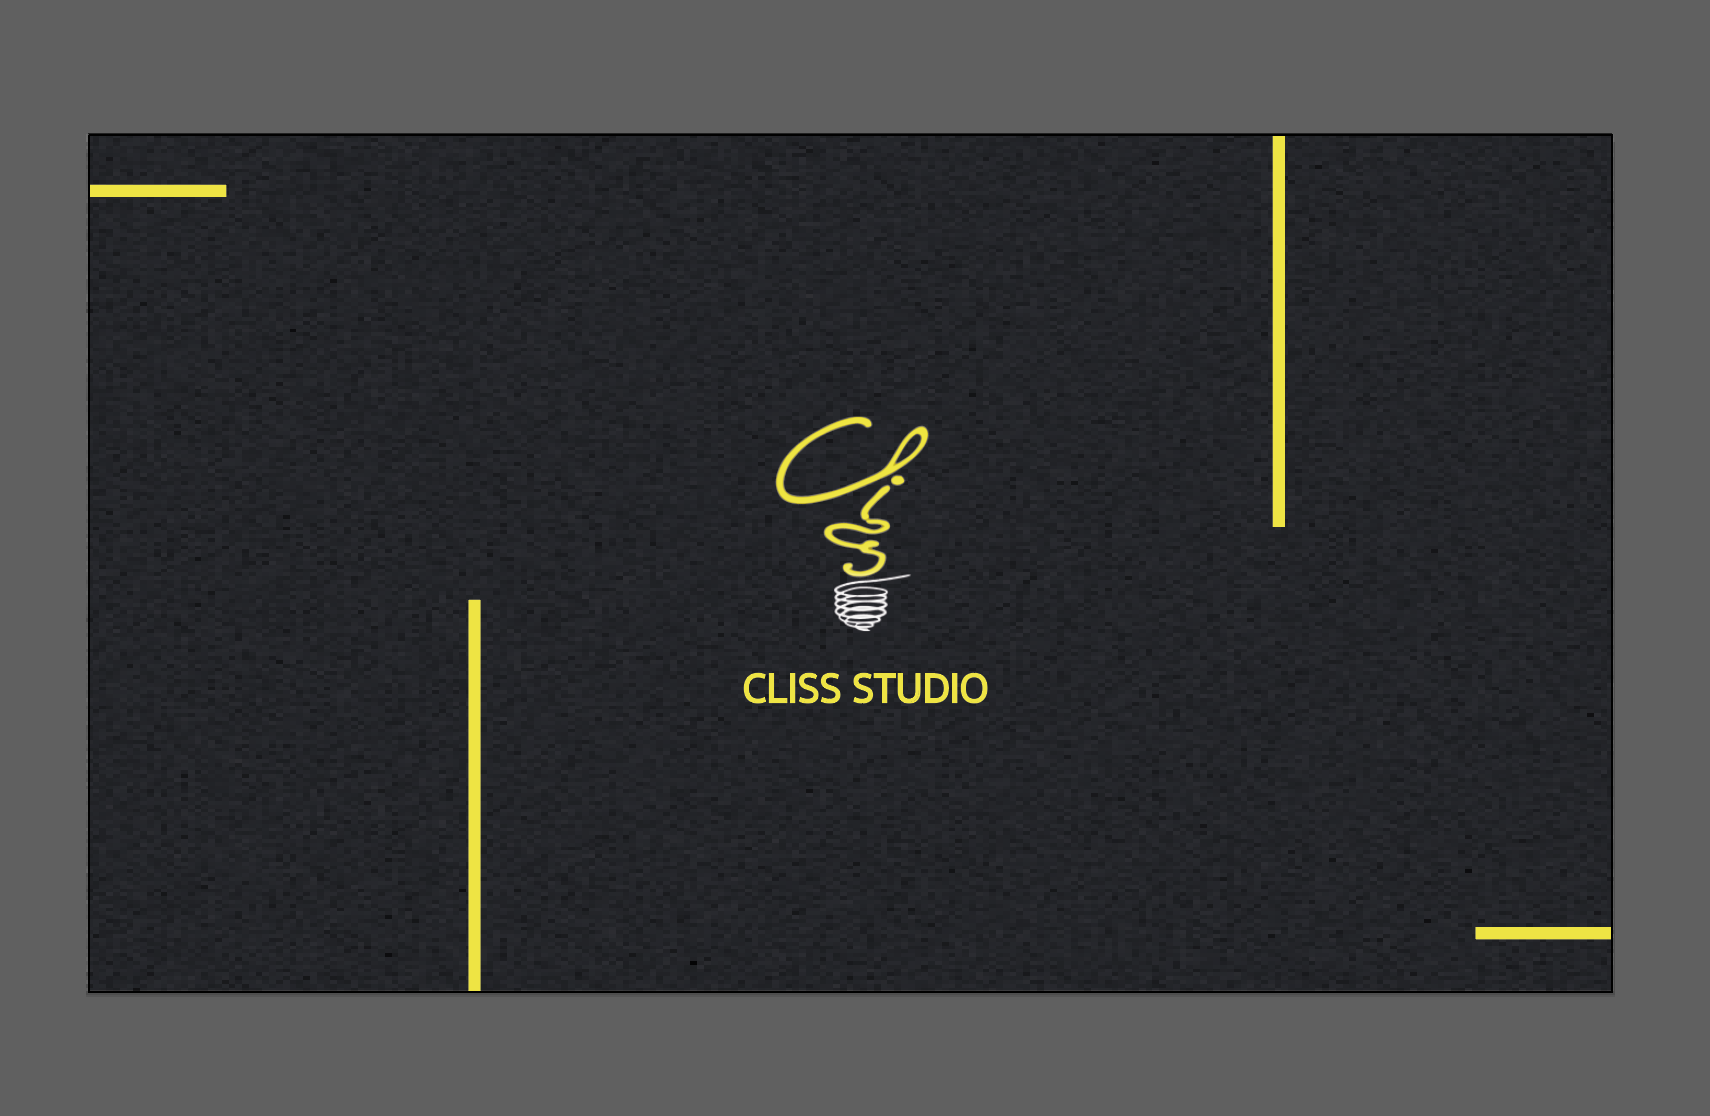 My Favourite Memory – CLISS STUDIOS